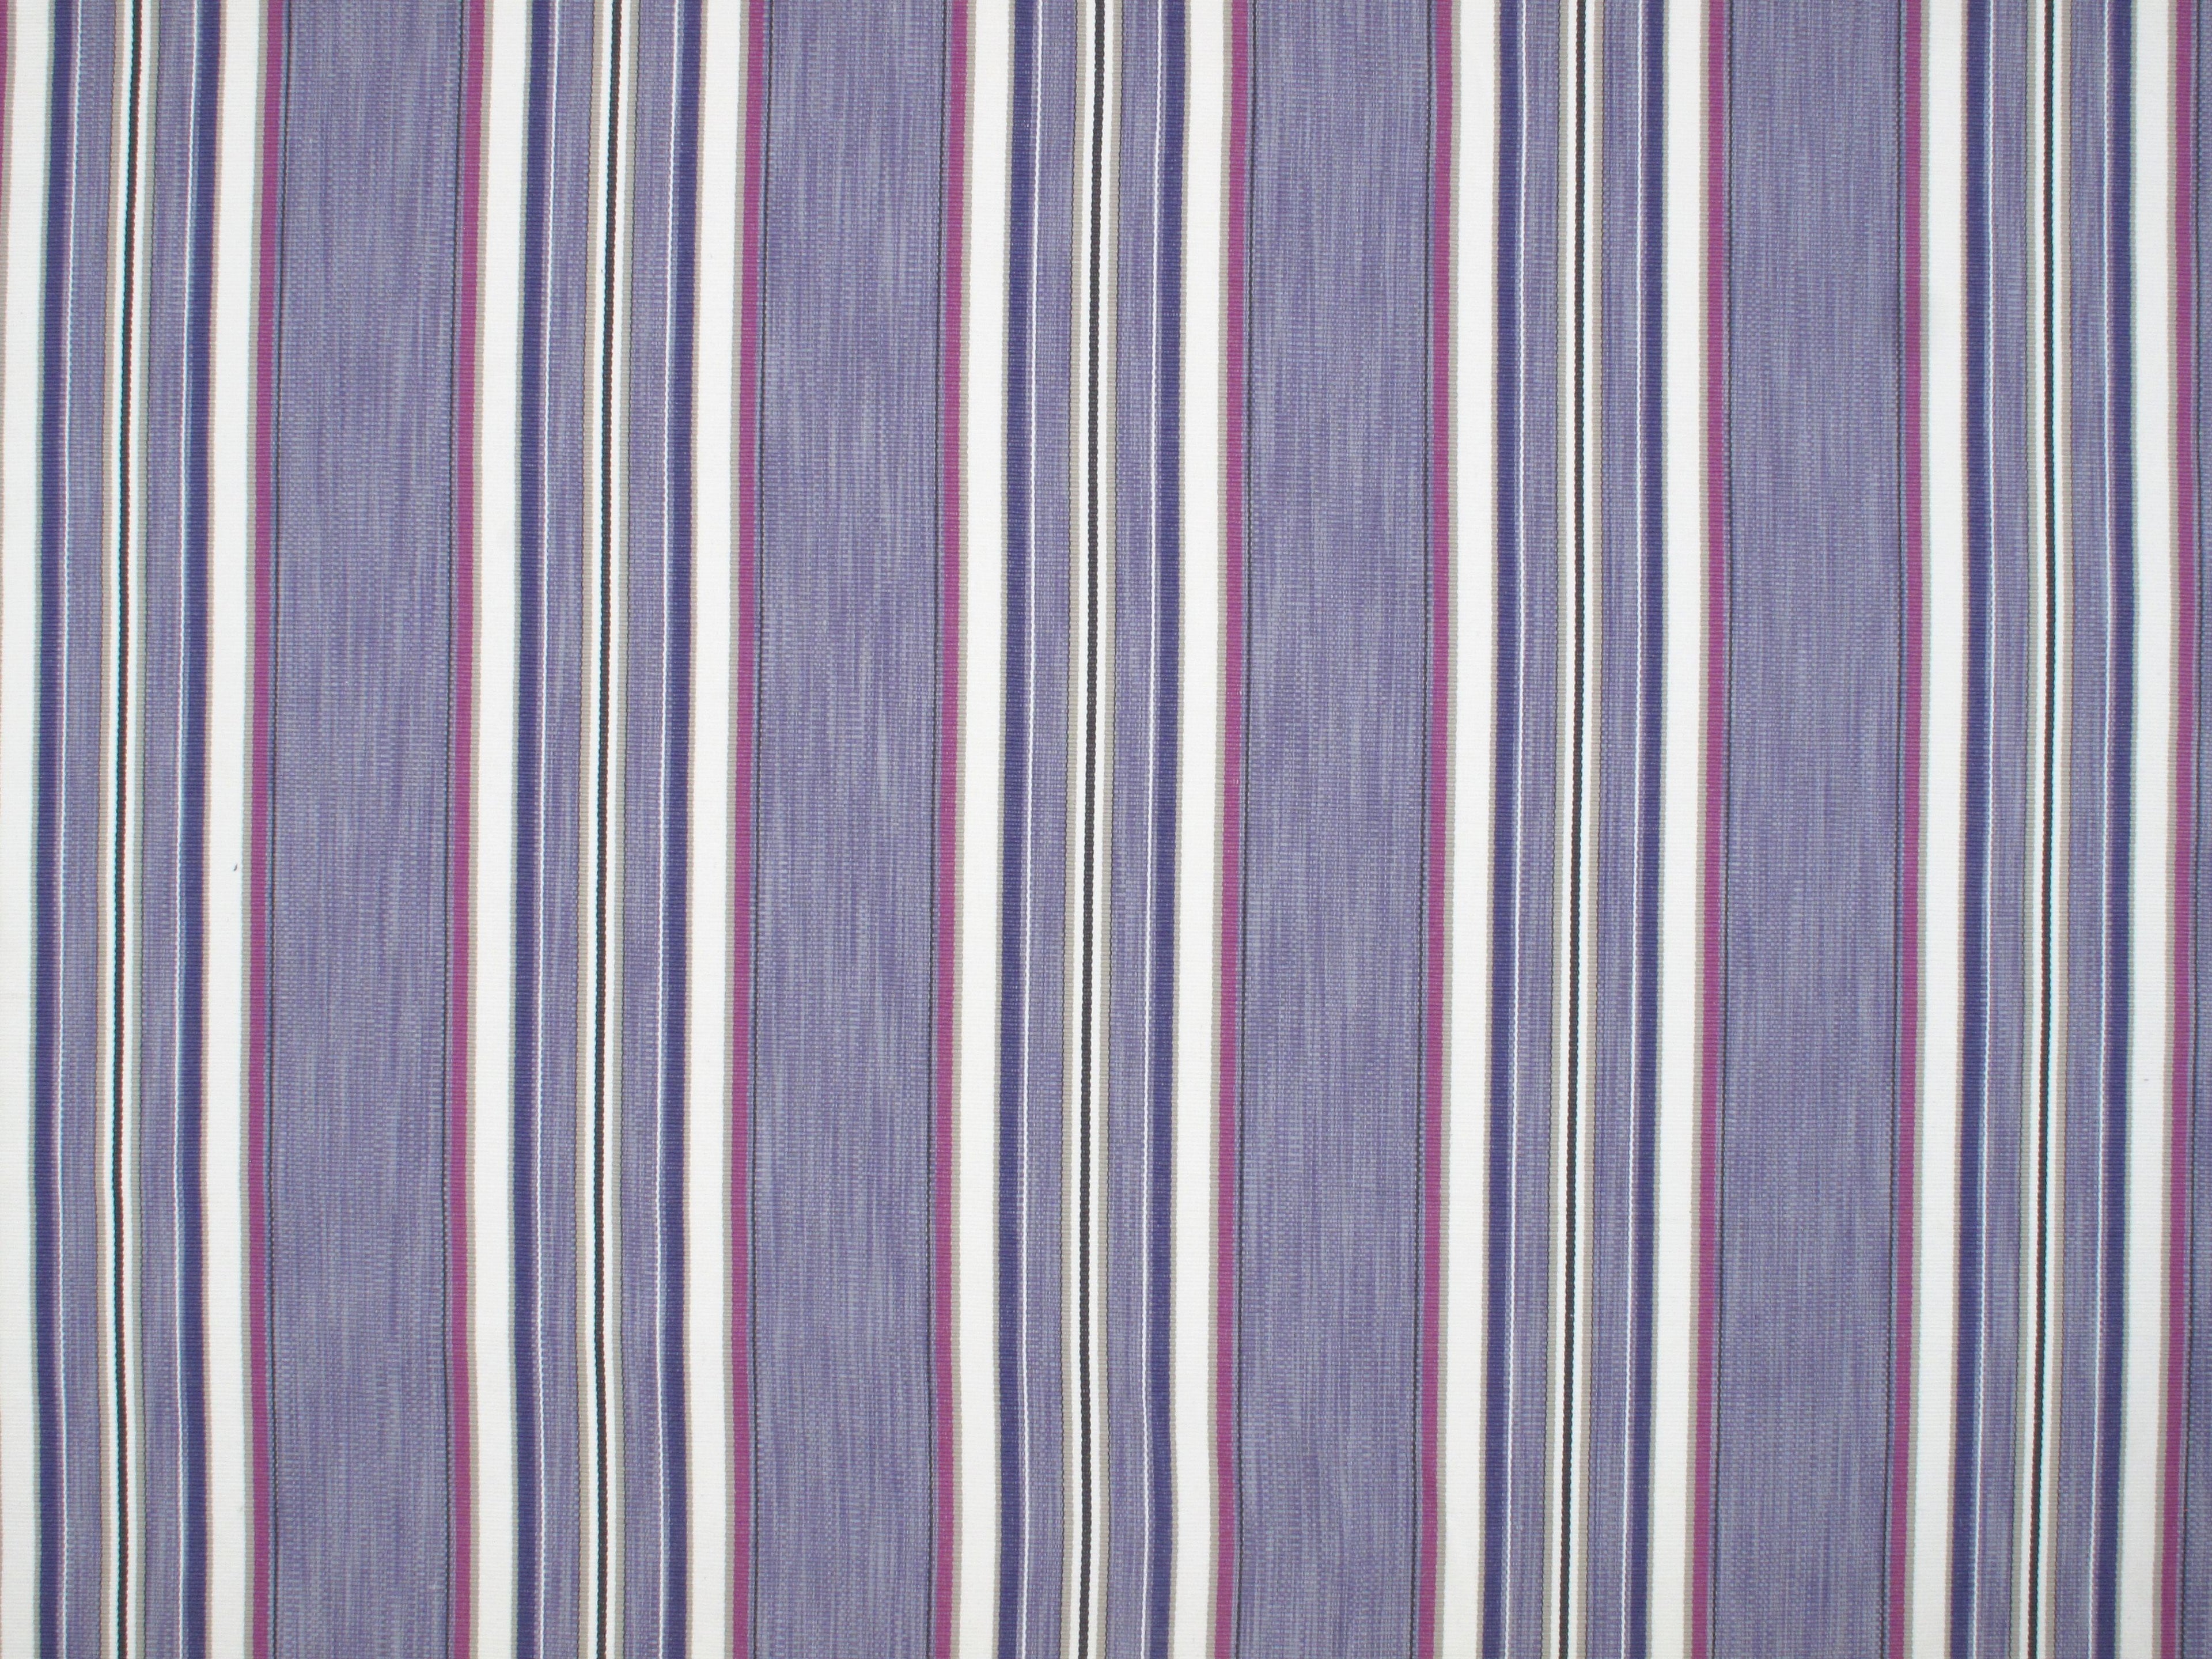 Bandos fabric in lilac color - pattern number PQ 0002A168 - by Scalamandre in the Old World Weavers collection